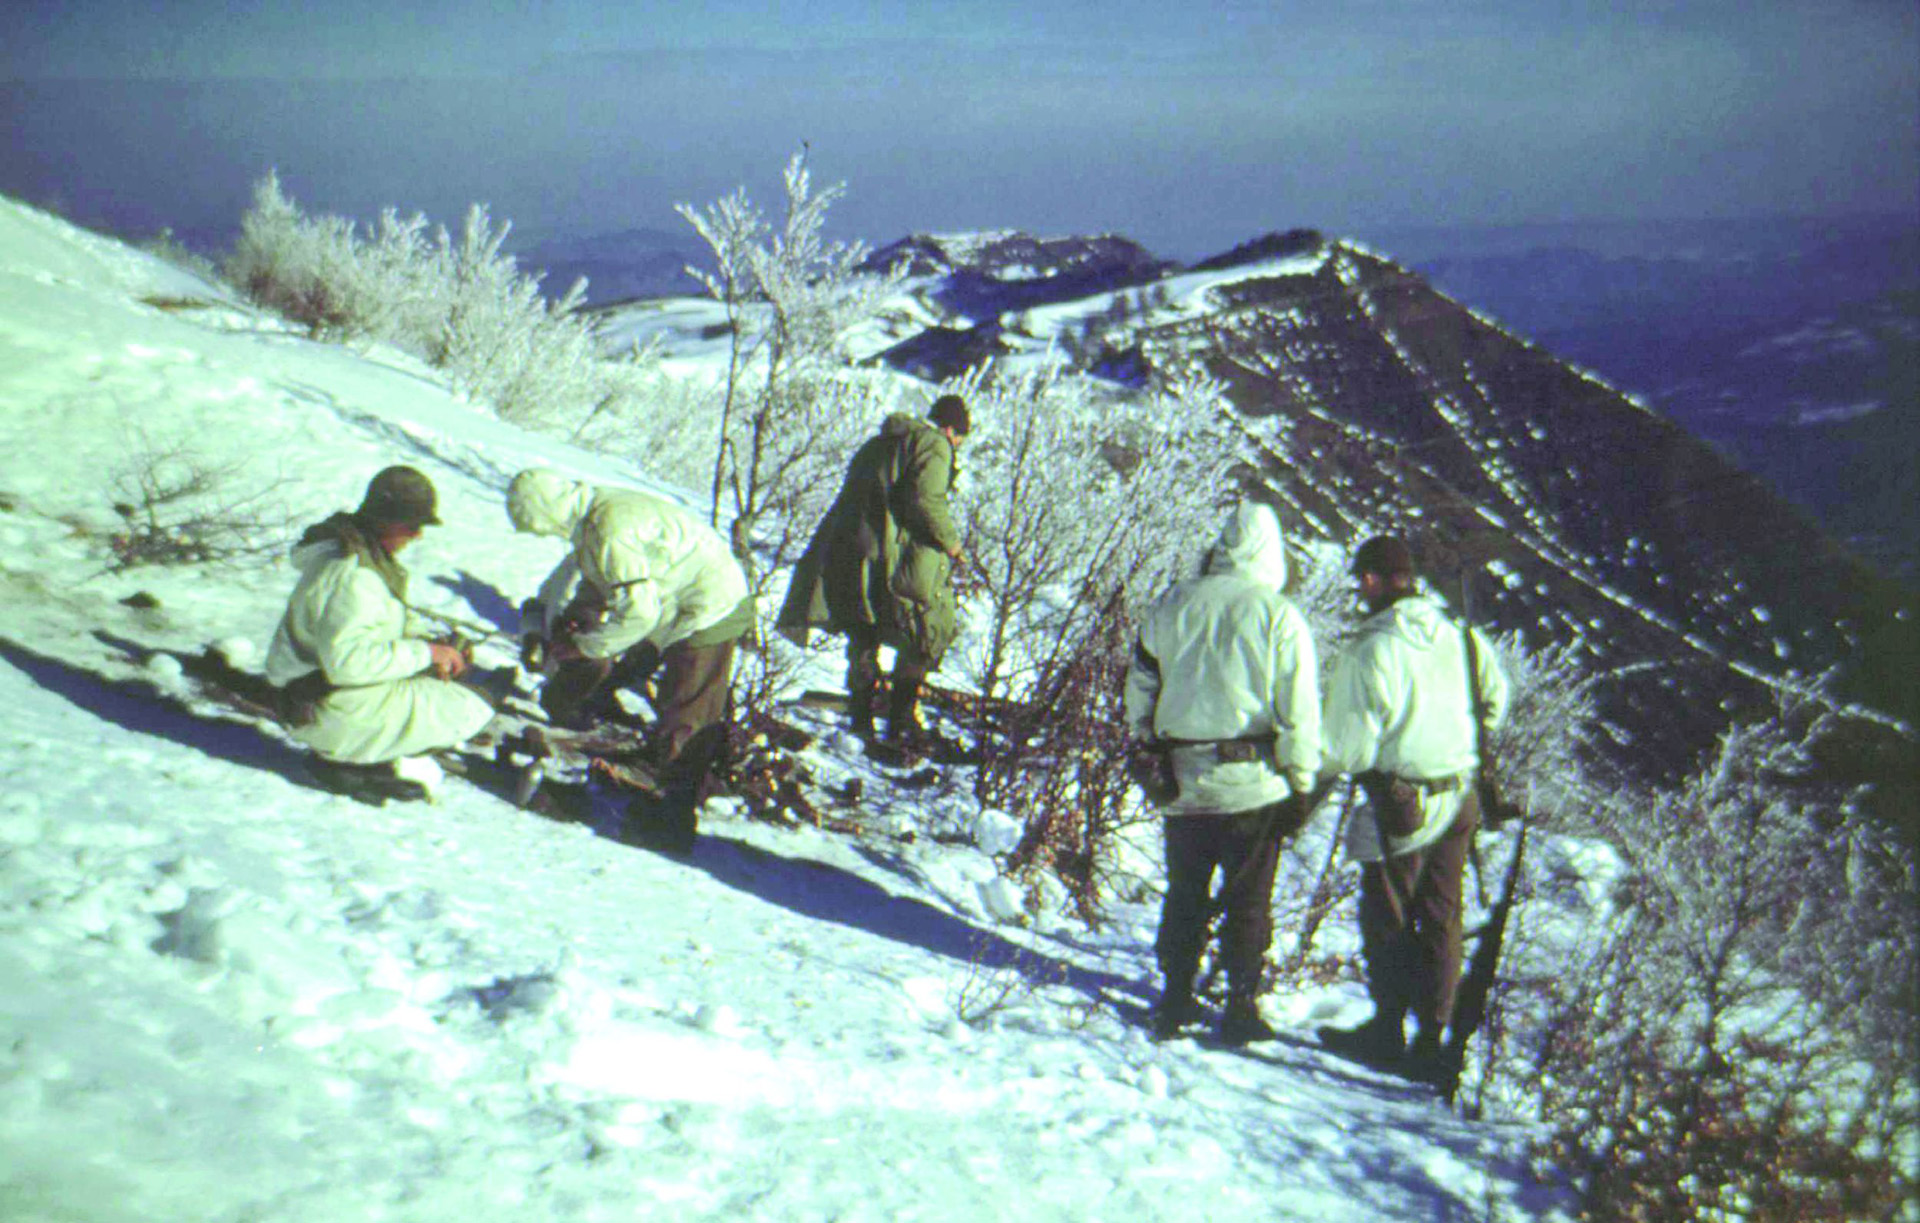 During a winter training exercise, 10th Mountain soldiers pause to rest on a steep slope.